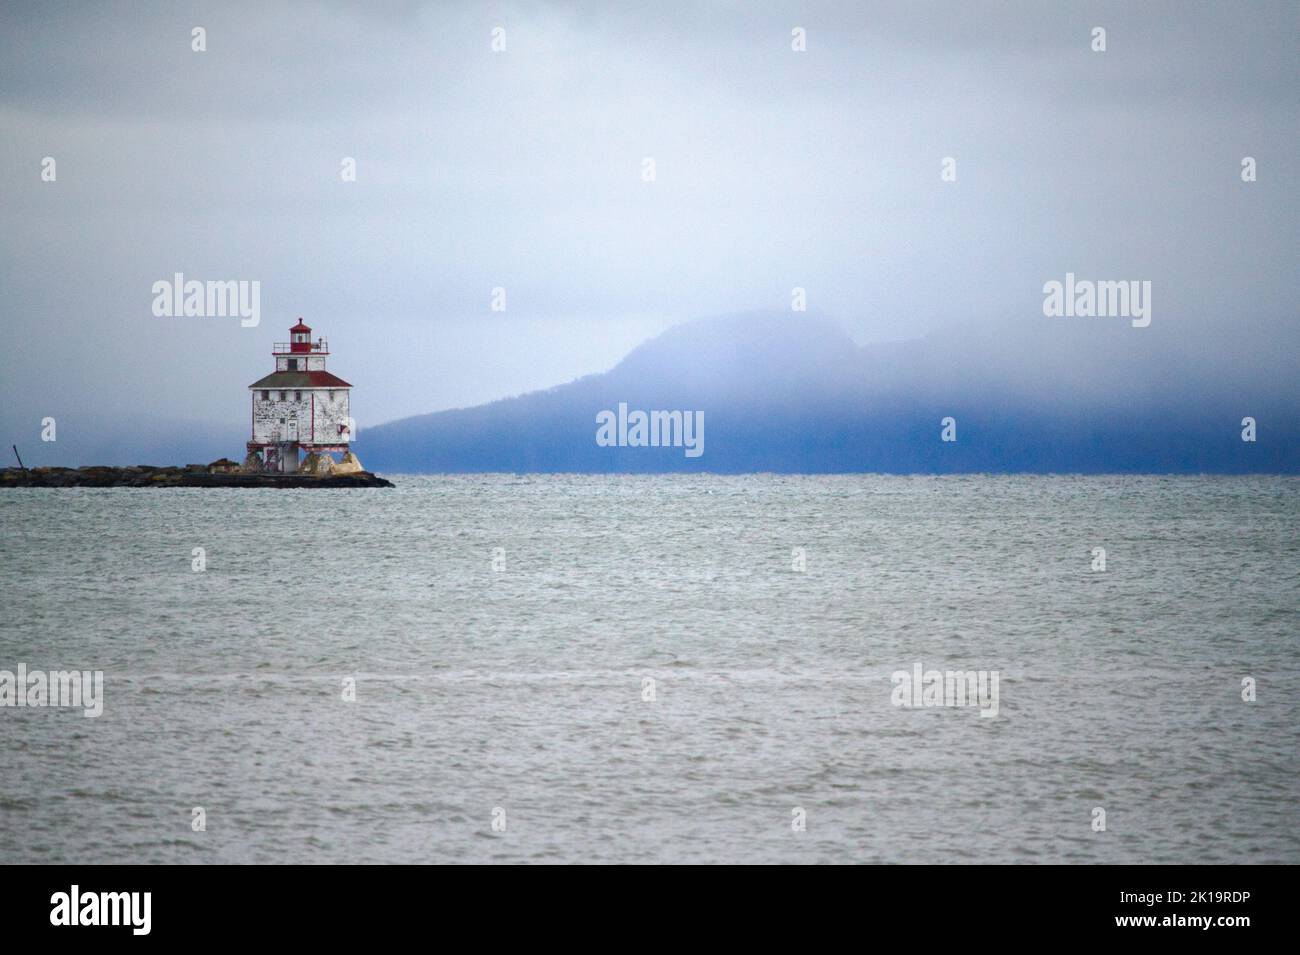 The Thunder Bay Lighthouse against the Sleeping Giant at Lake Superior on a foggy day. Stock Photo